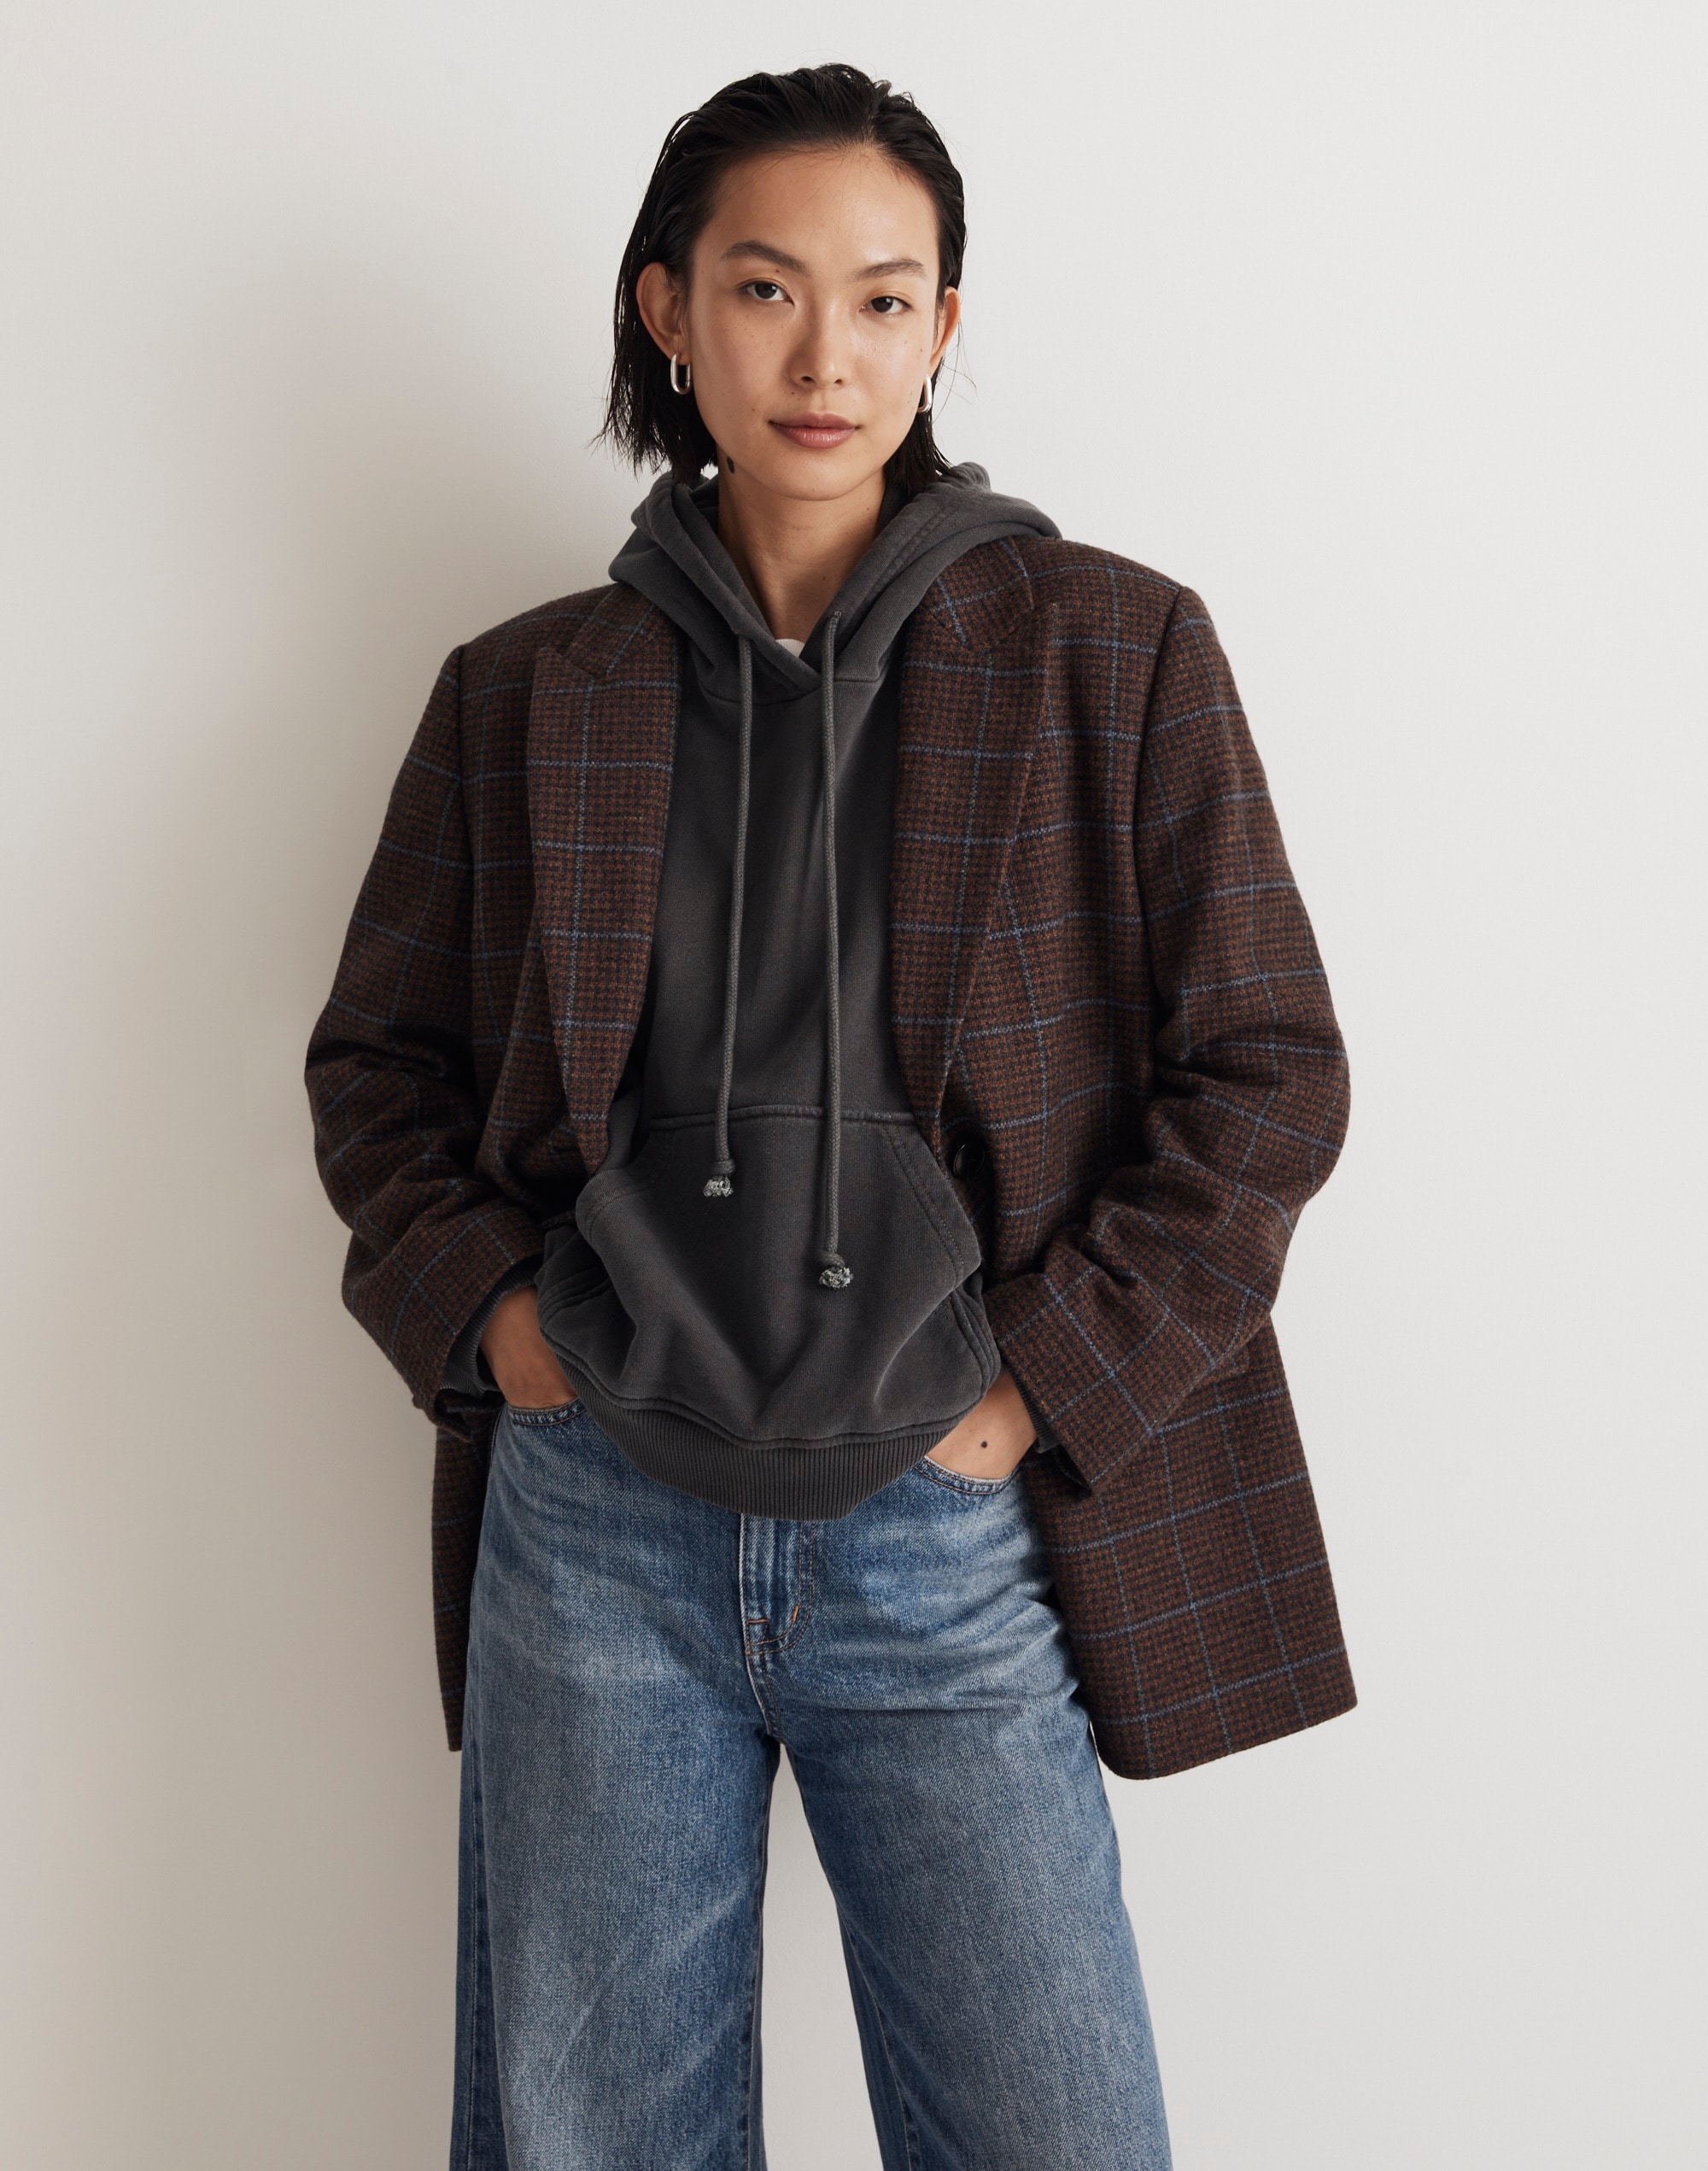 The Bedford Oversized Belted Blazer in Plaid Wool Blend